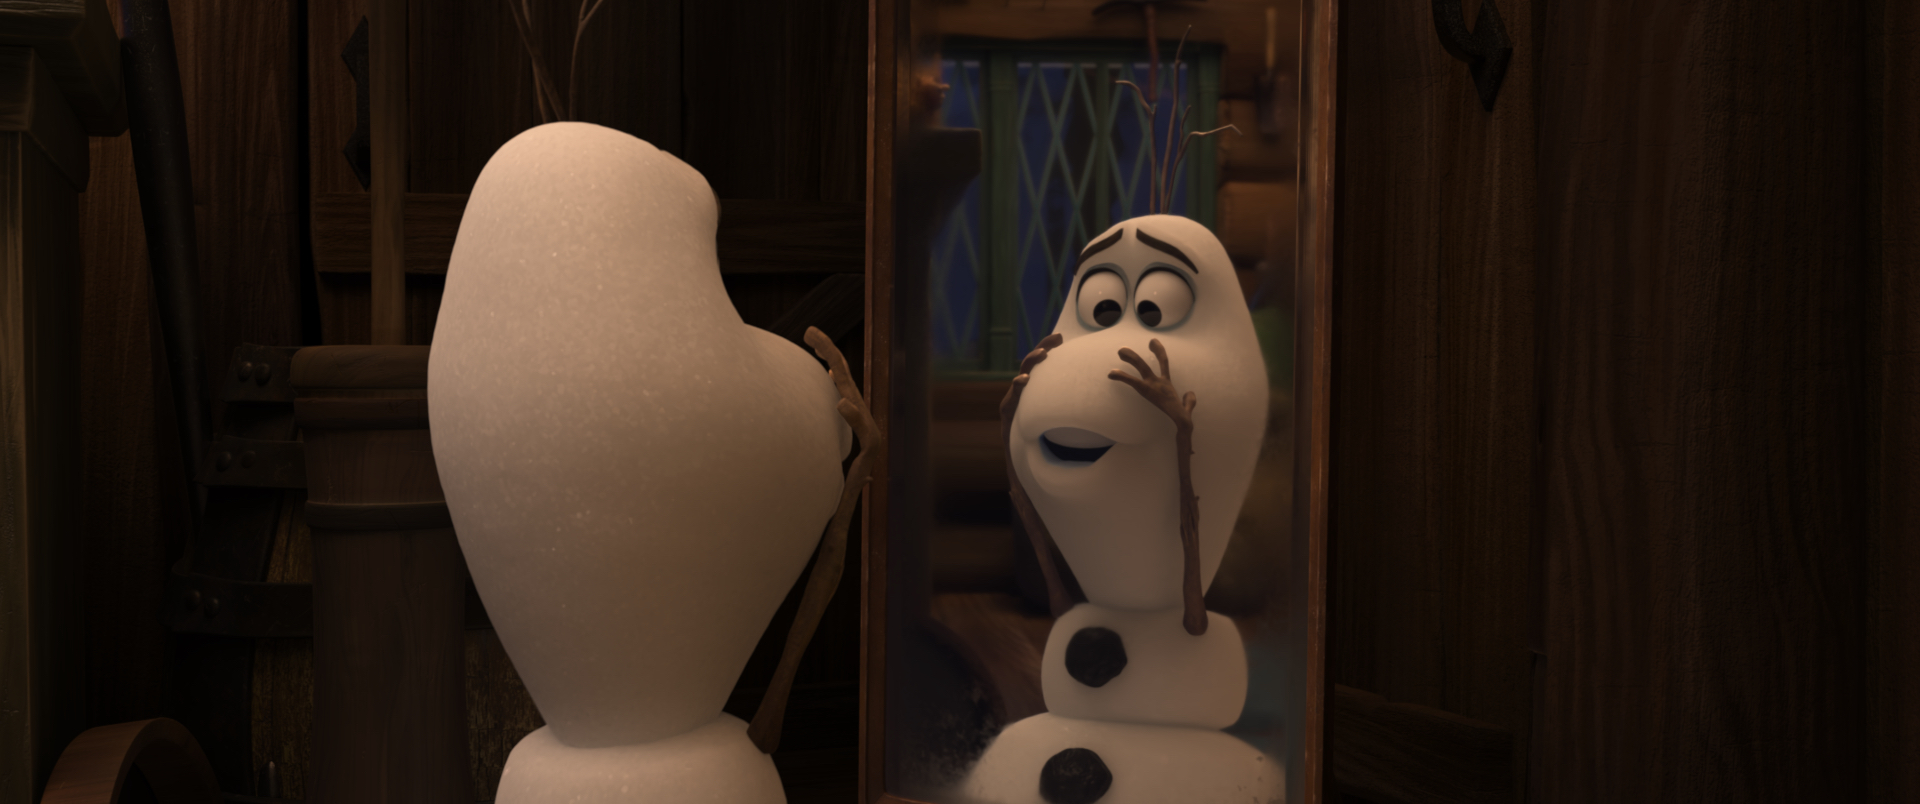 Once Upon A Snowman Trailer Shows Us Olaf’s Beginnings